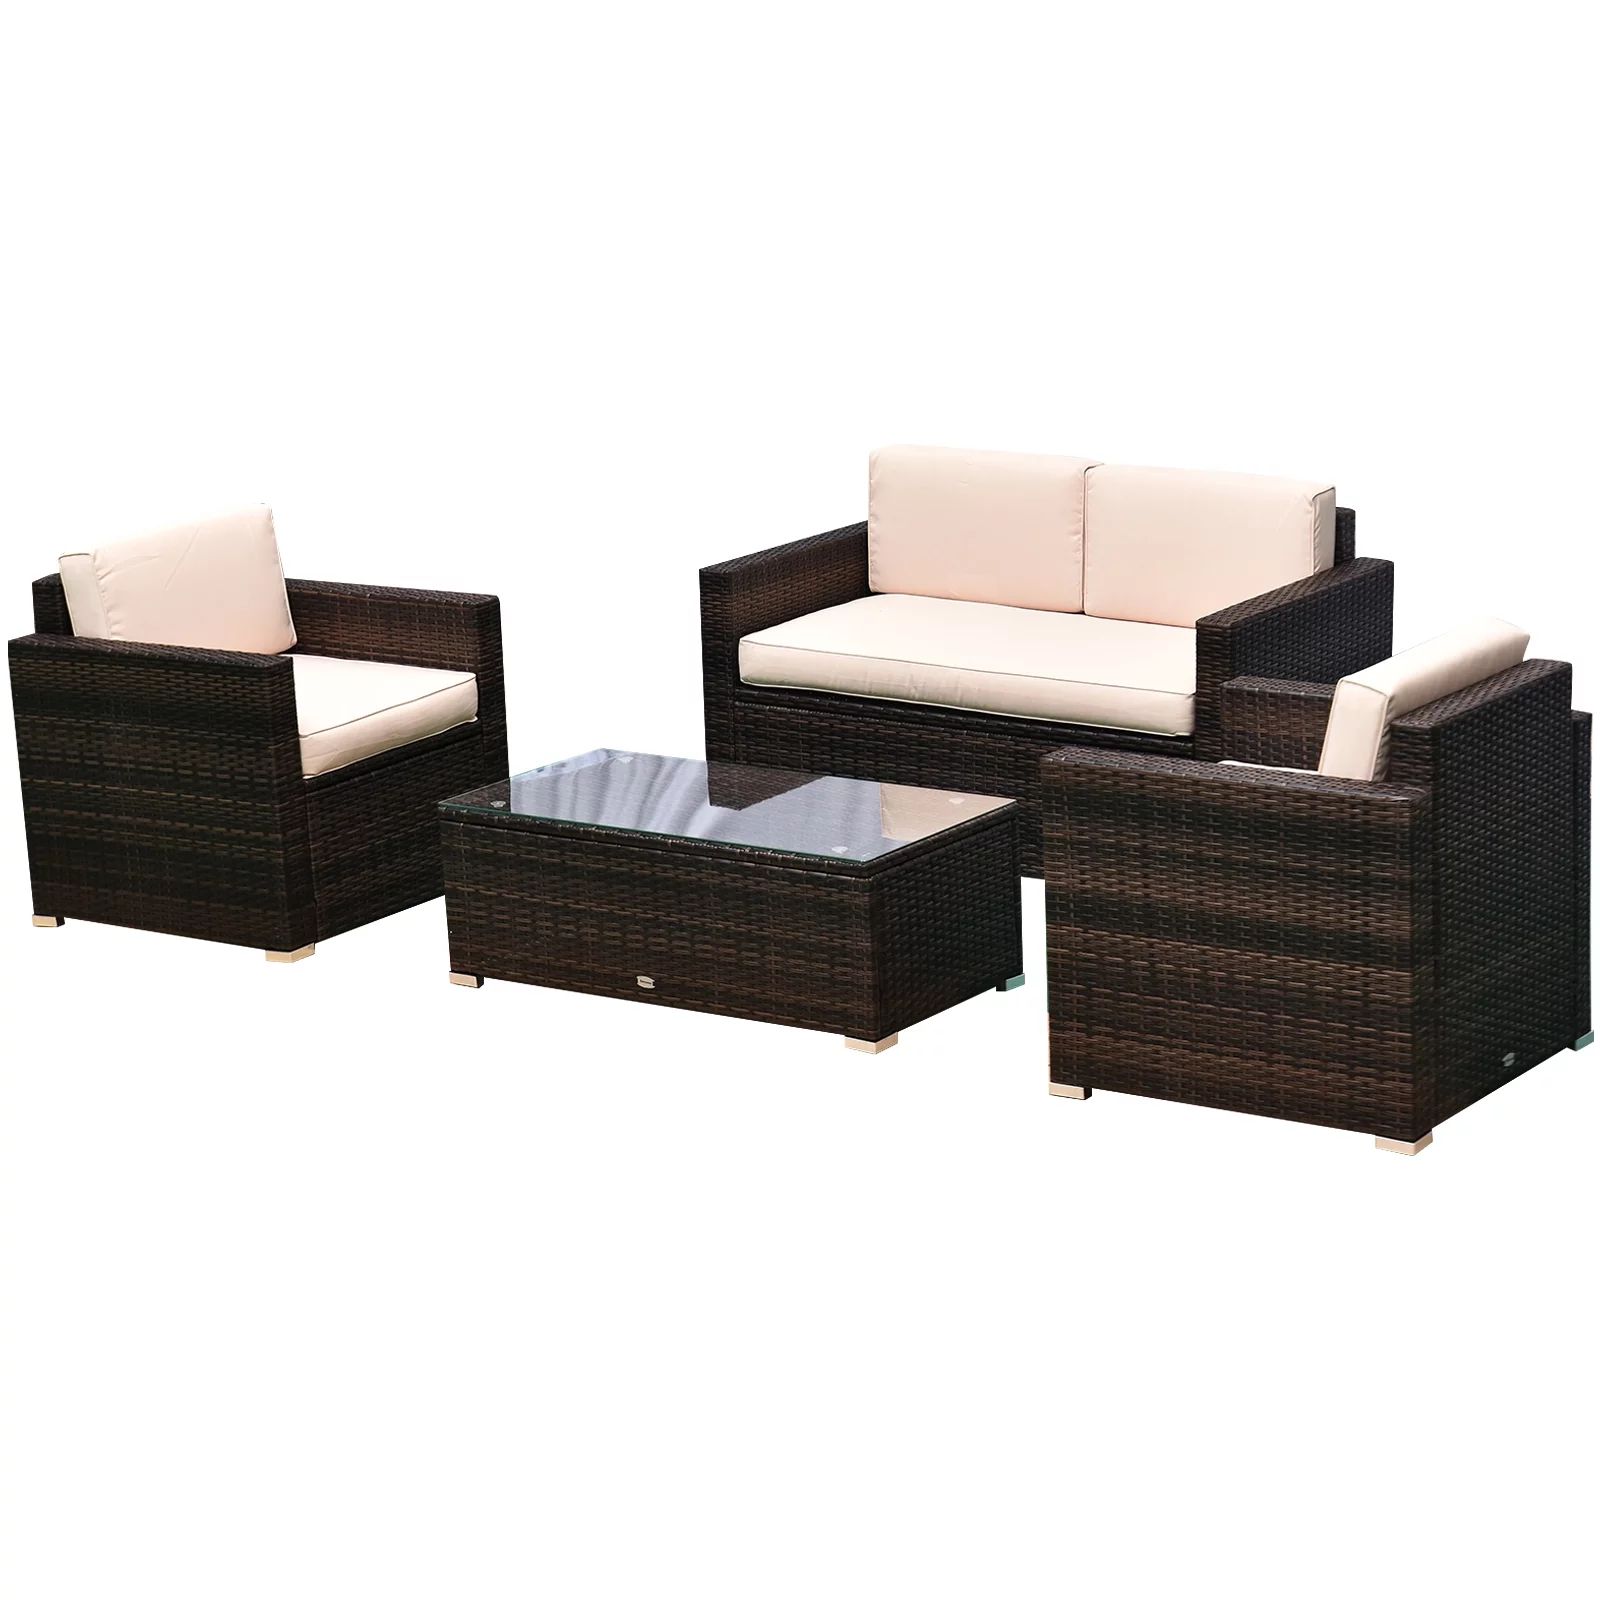 Outsunny 4 Pieces Outdoor Wicker Patio Sofa Set, Rattan Conversation Furniture with Cushions and ... | Walmart (US)